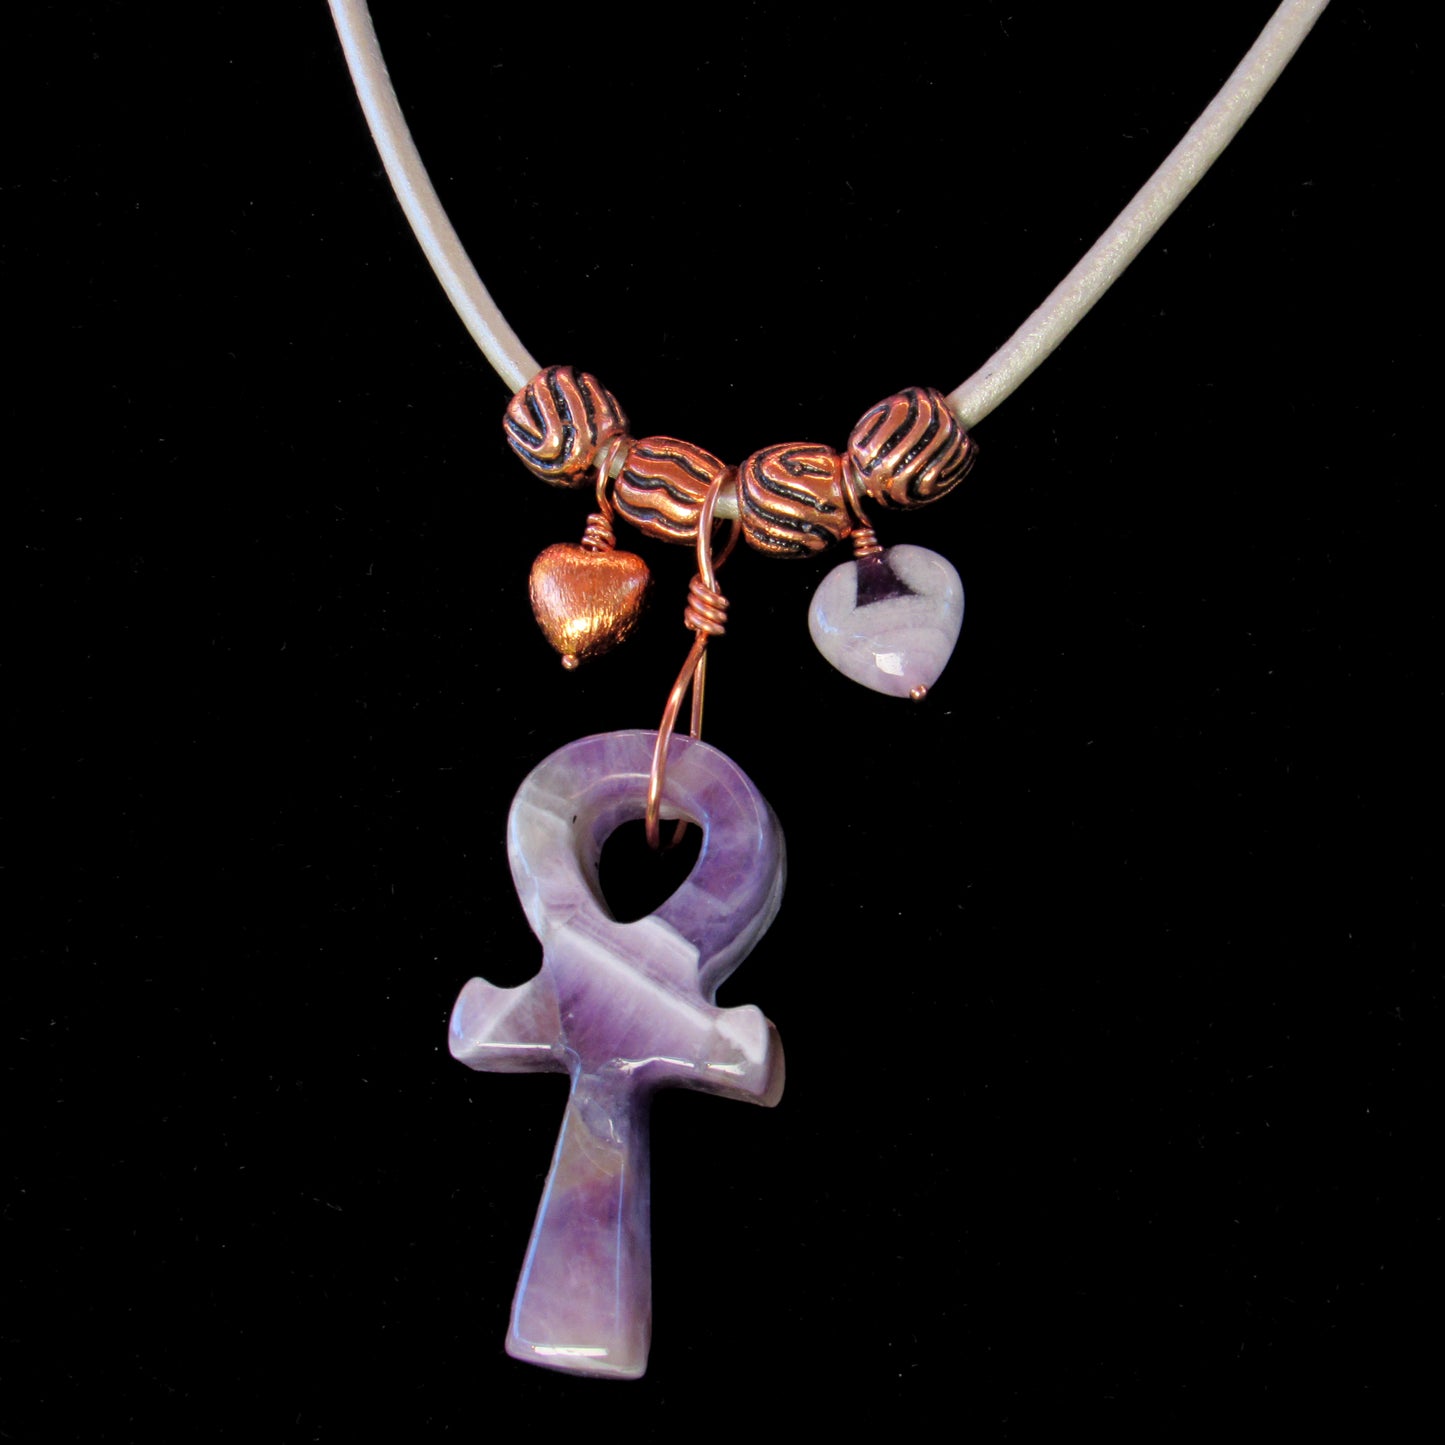 Amethyst gemstone carved Ankh pendant with copper on leather necklace